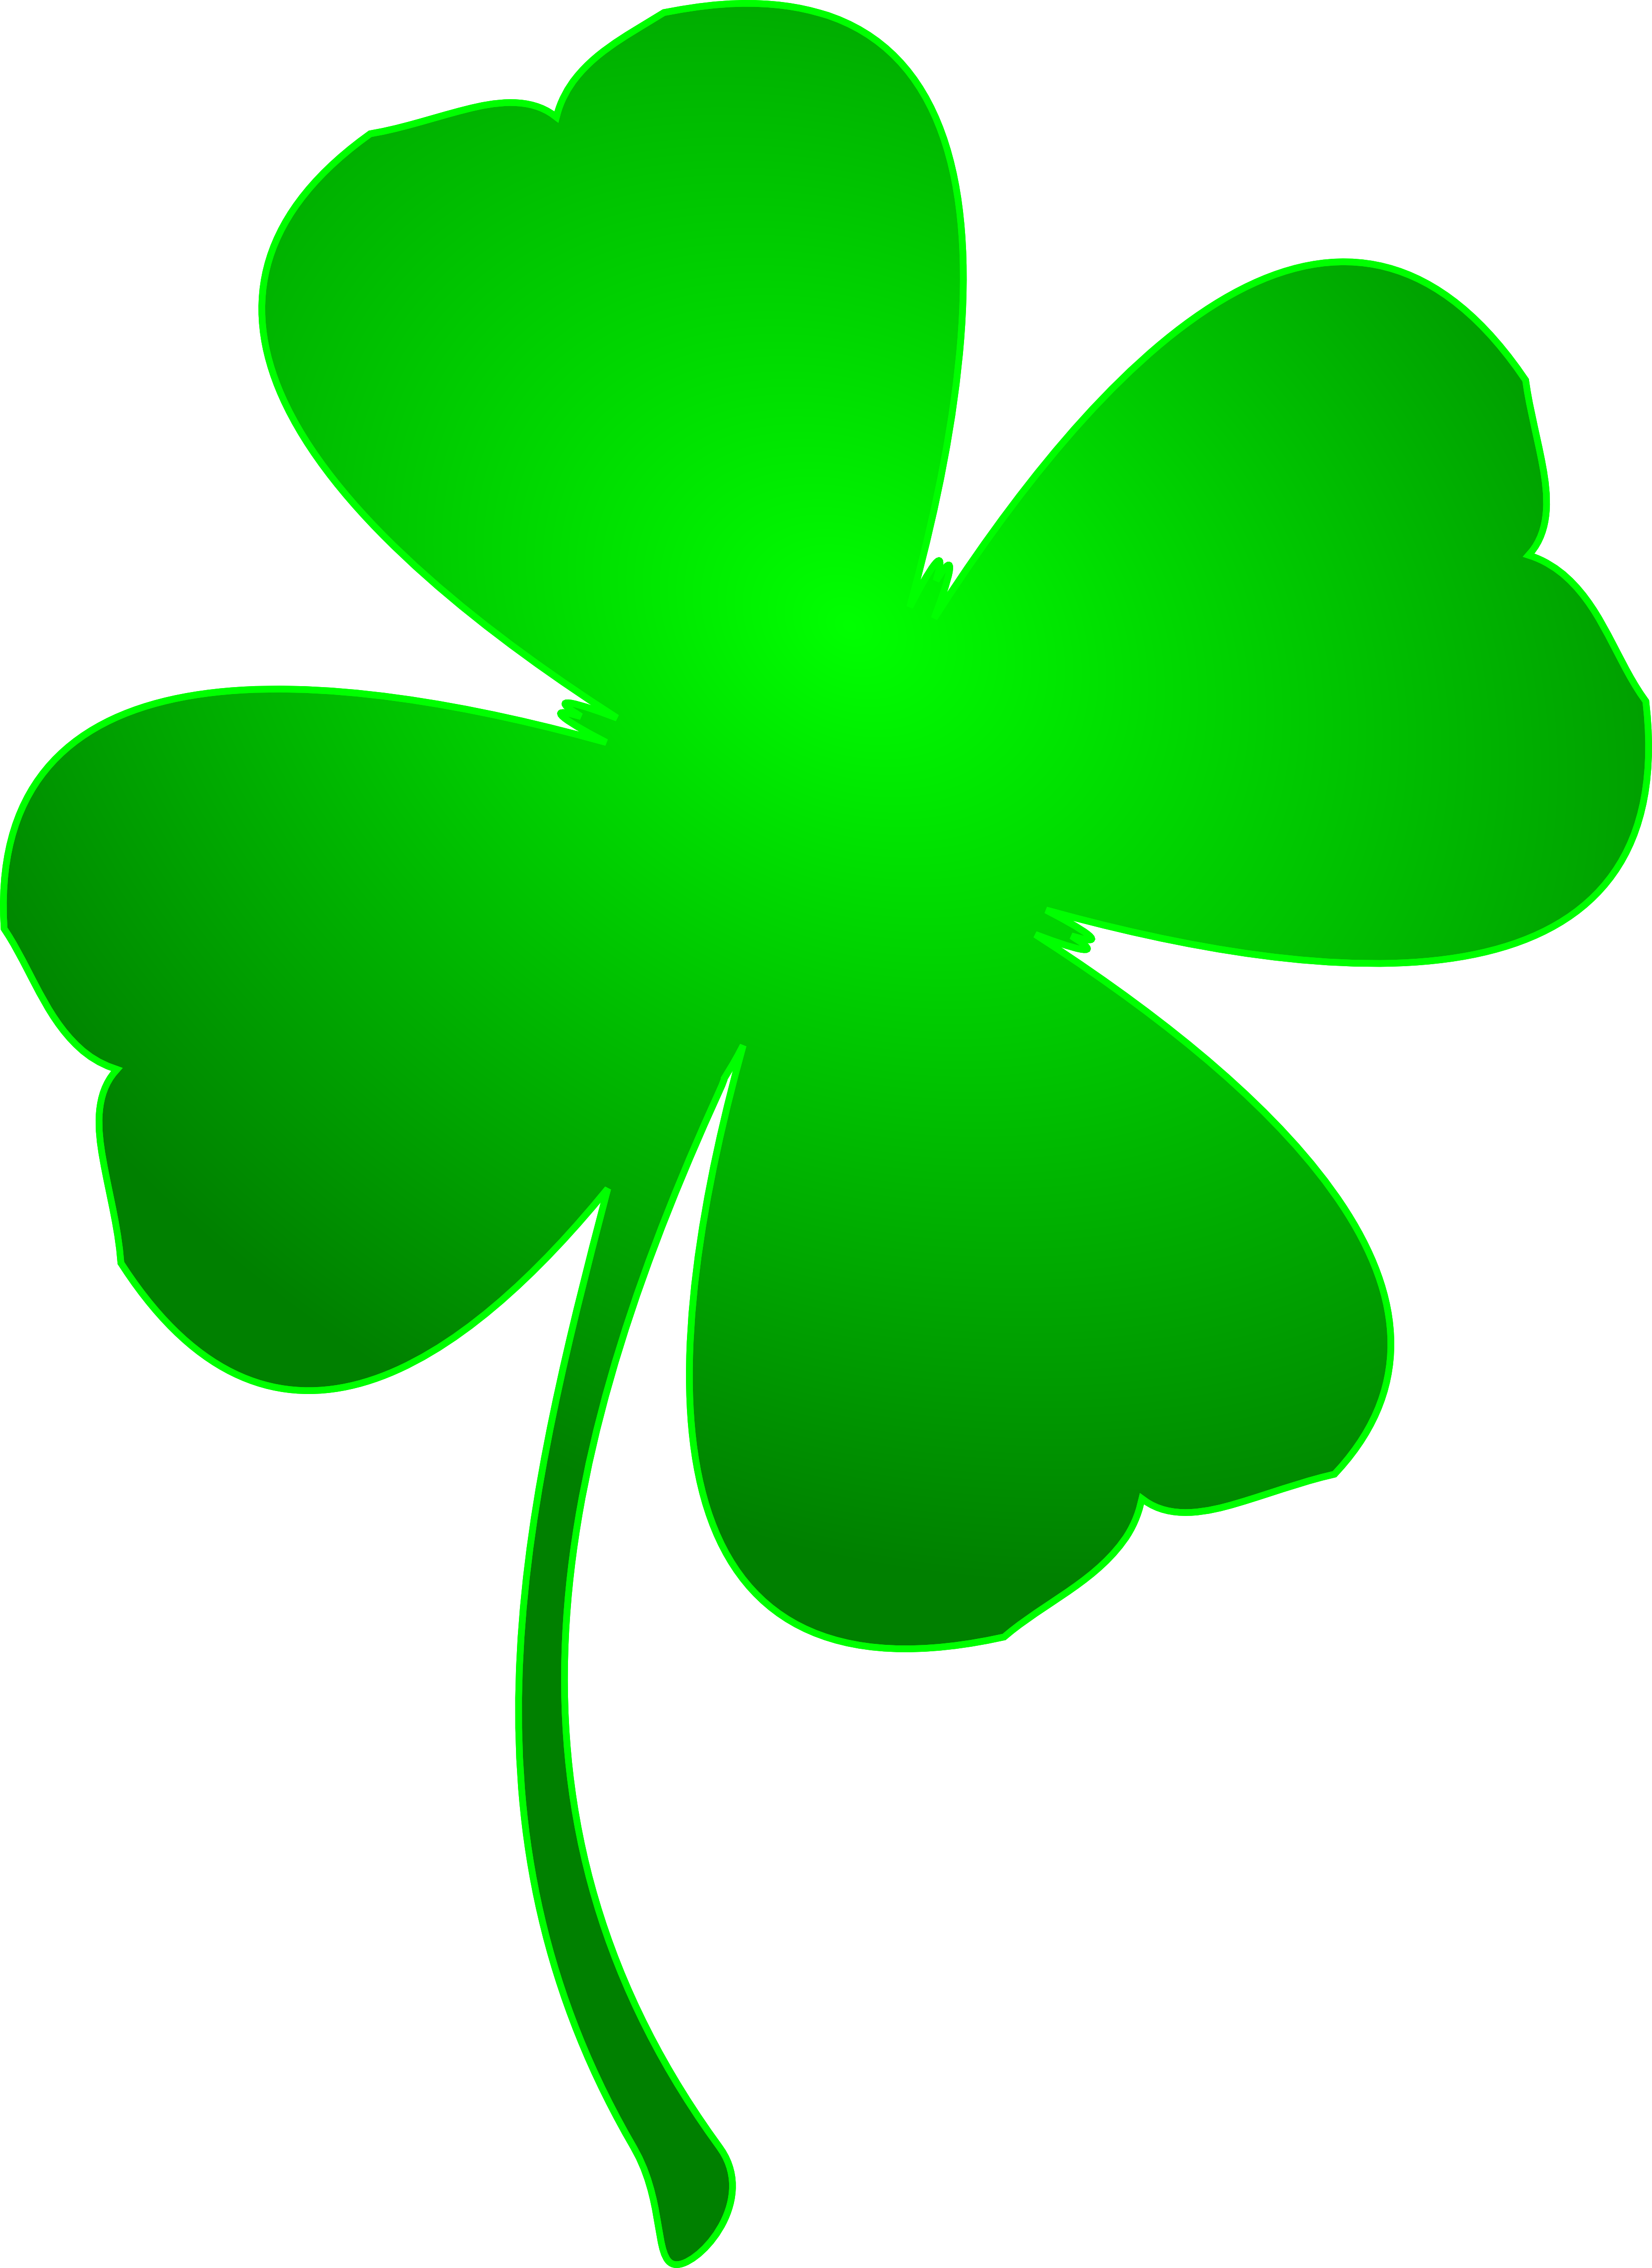 Clover Hd PNG Image